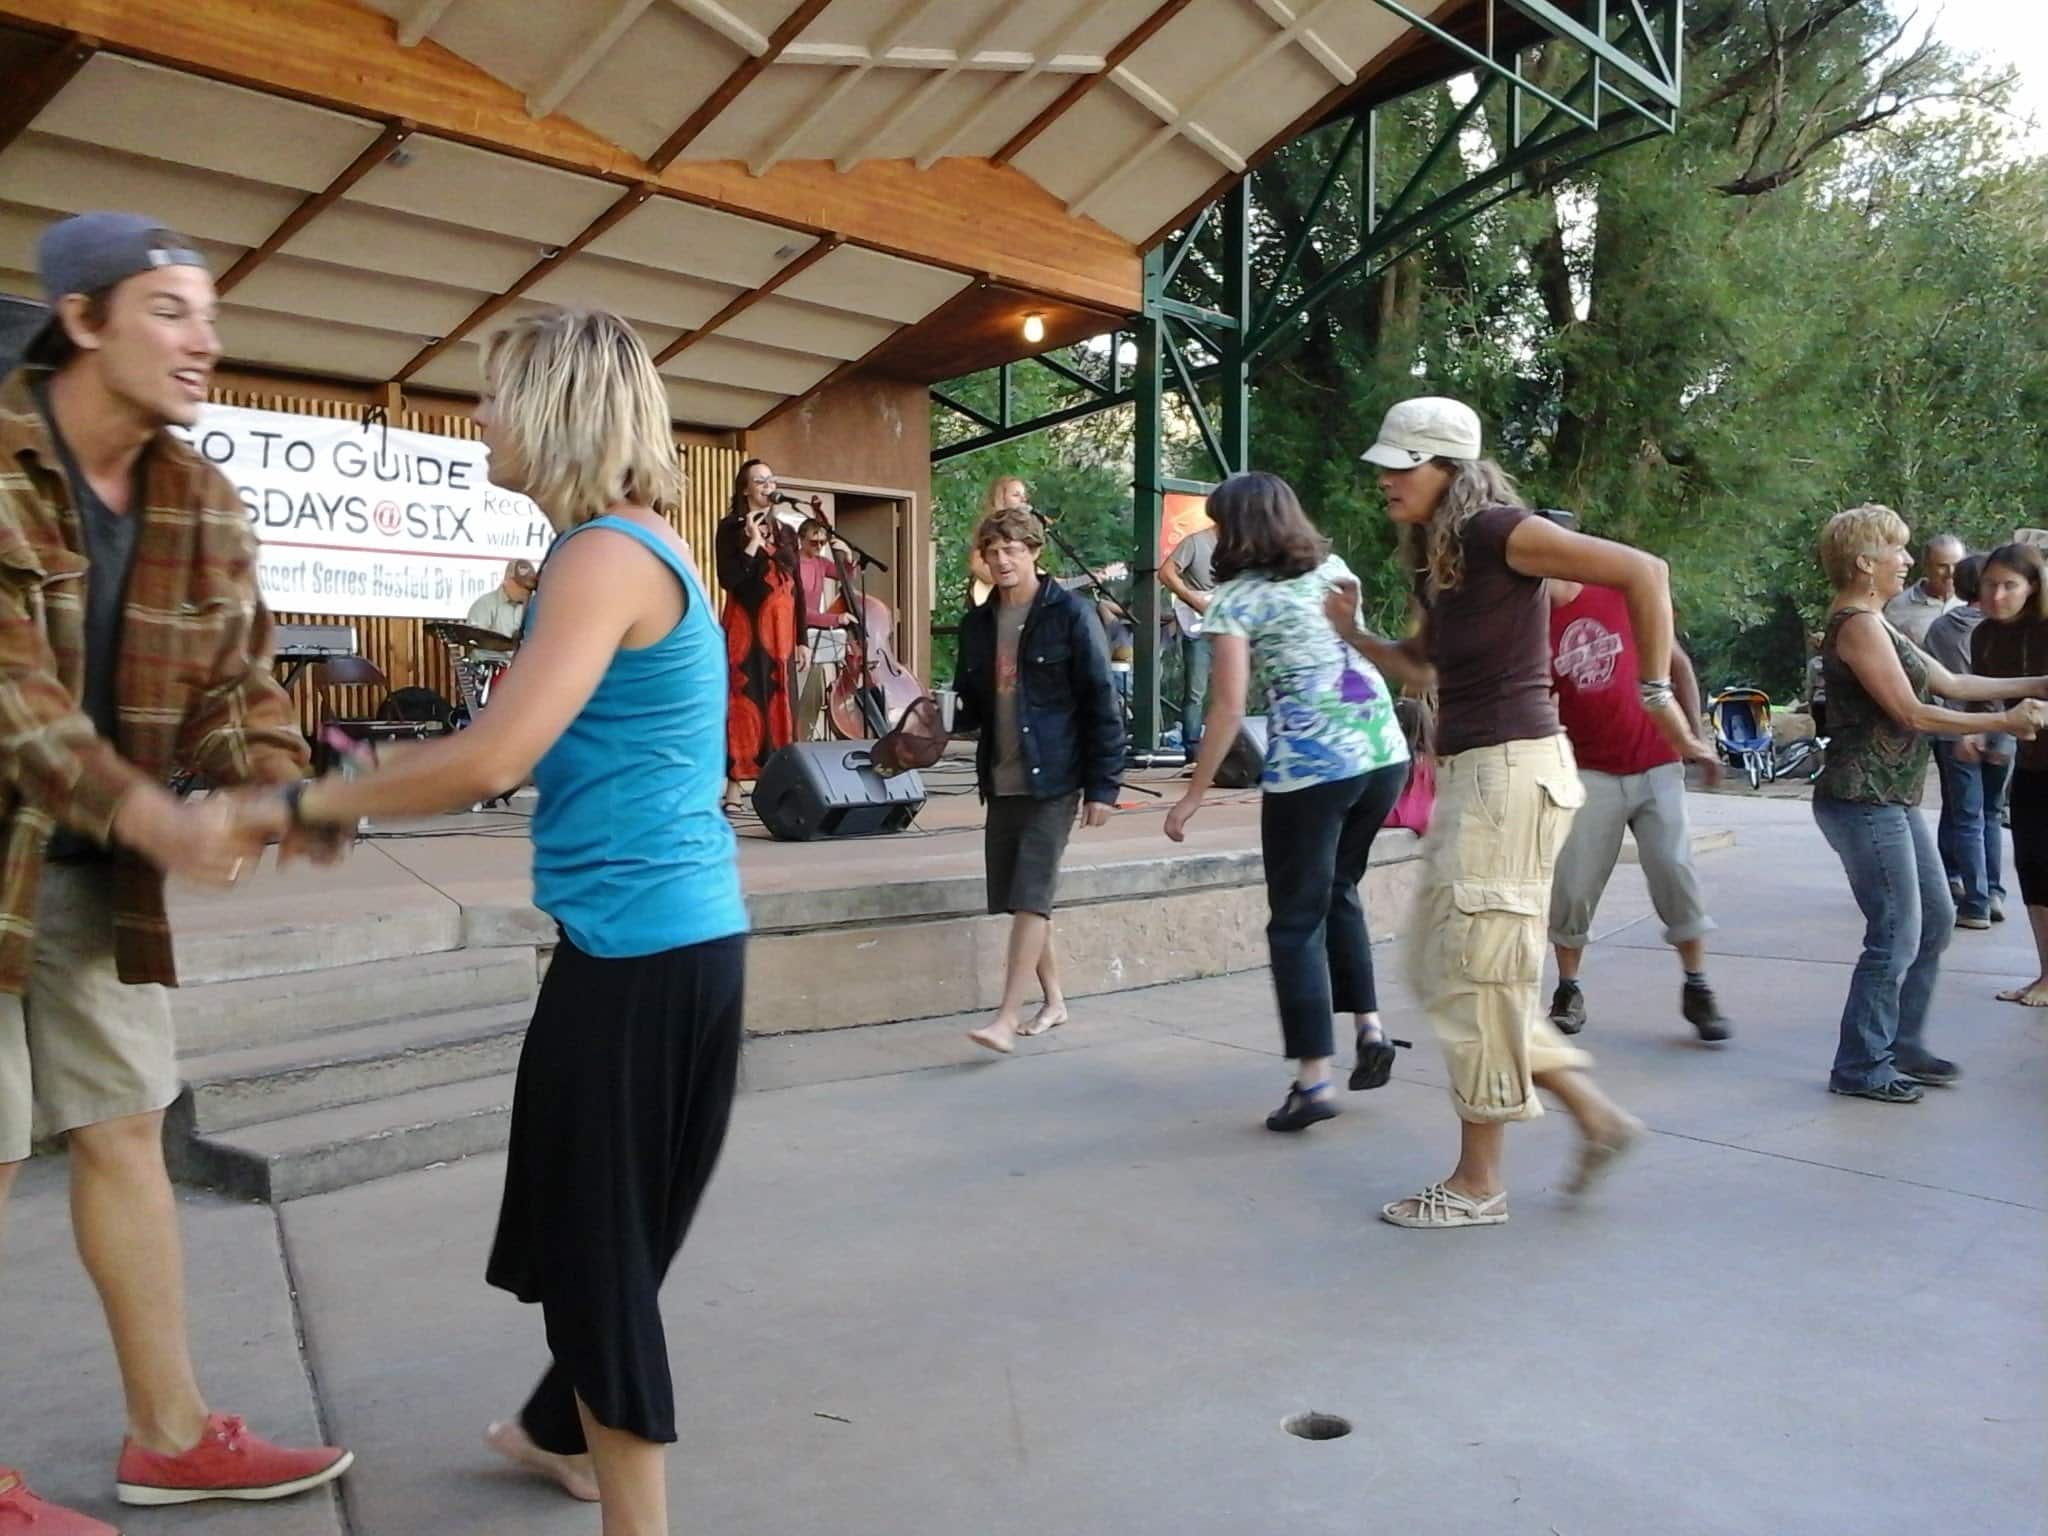 People dancing to the live music along the river park.